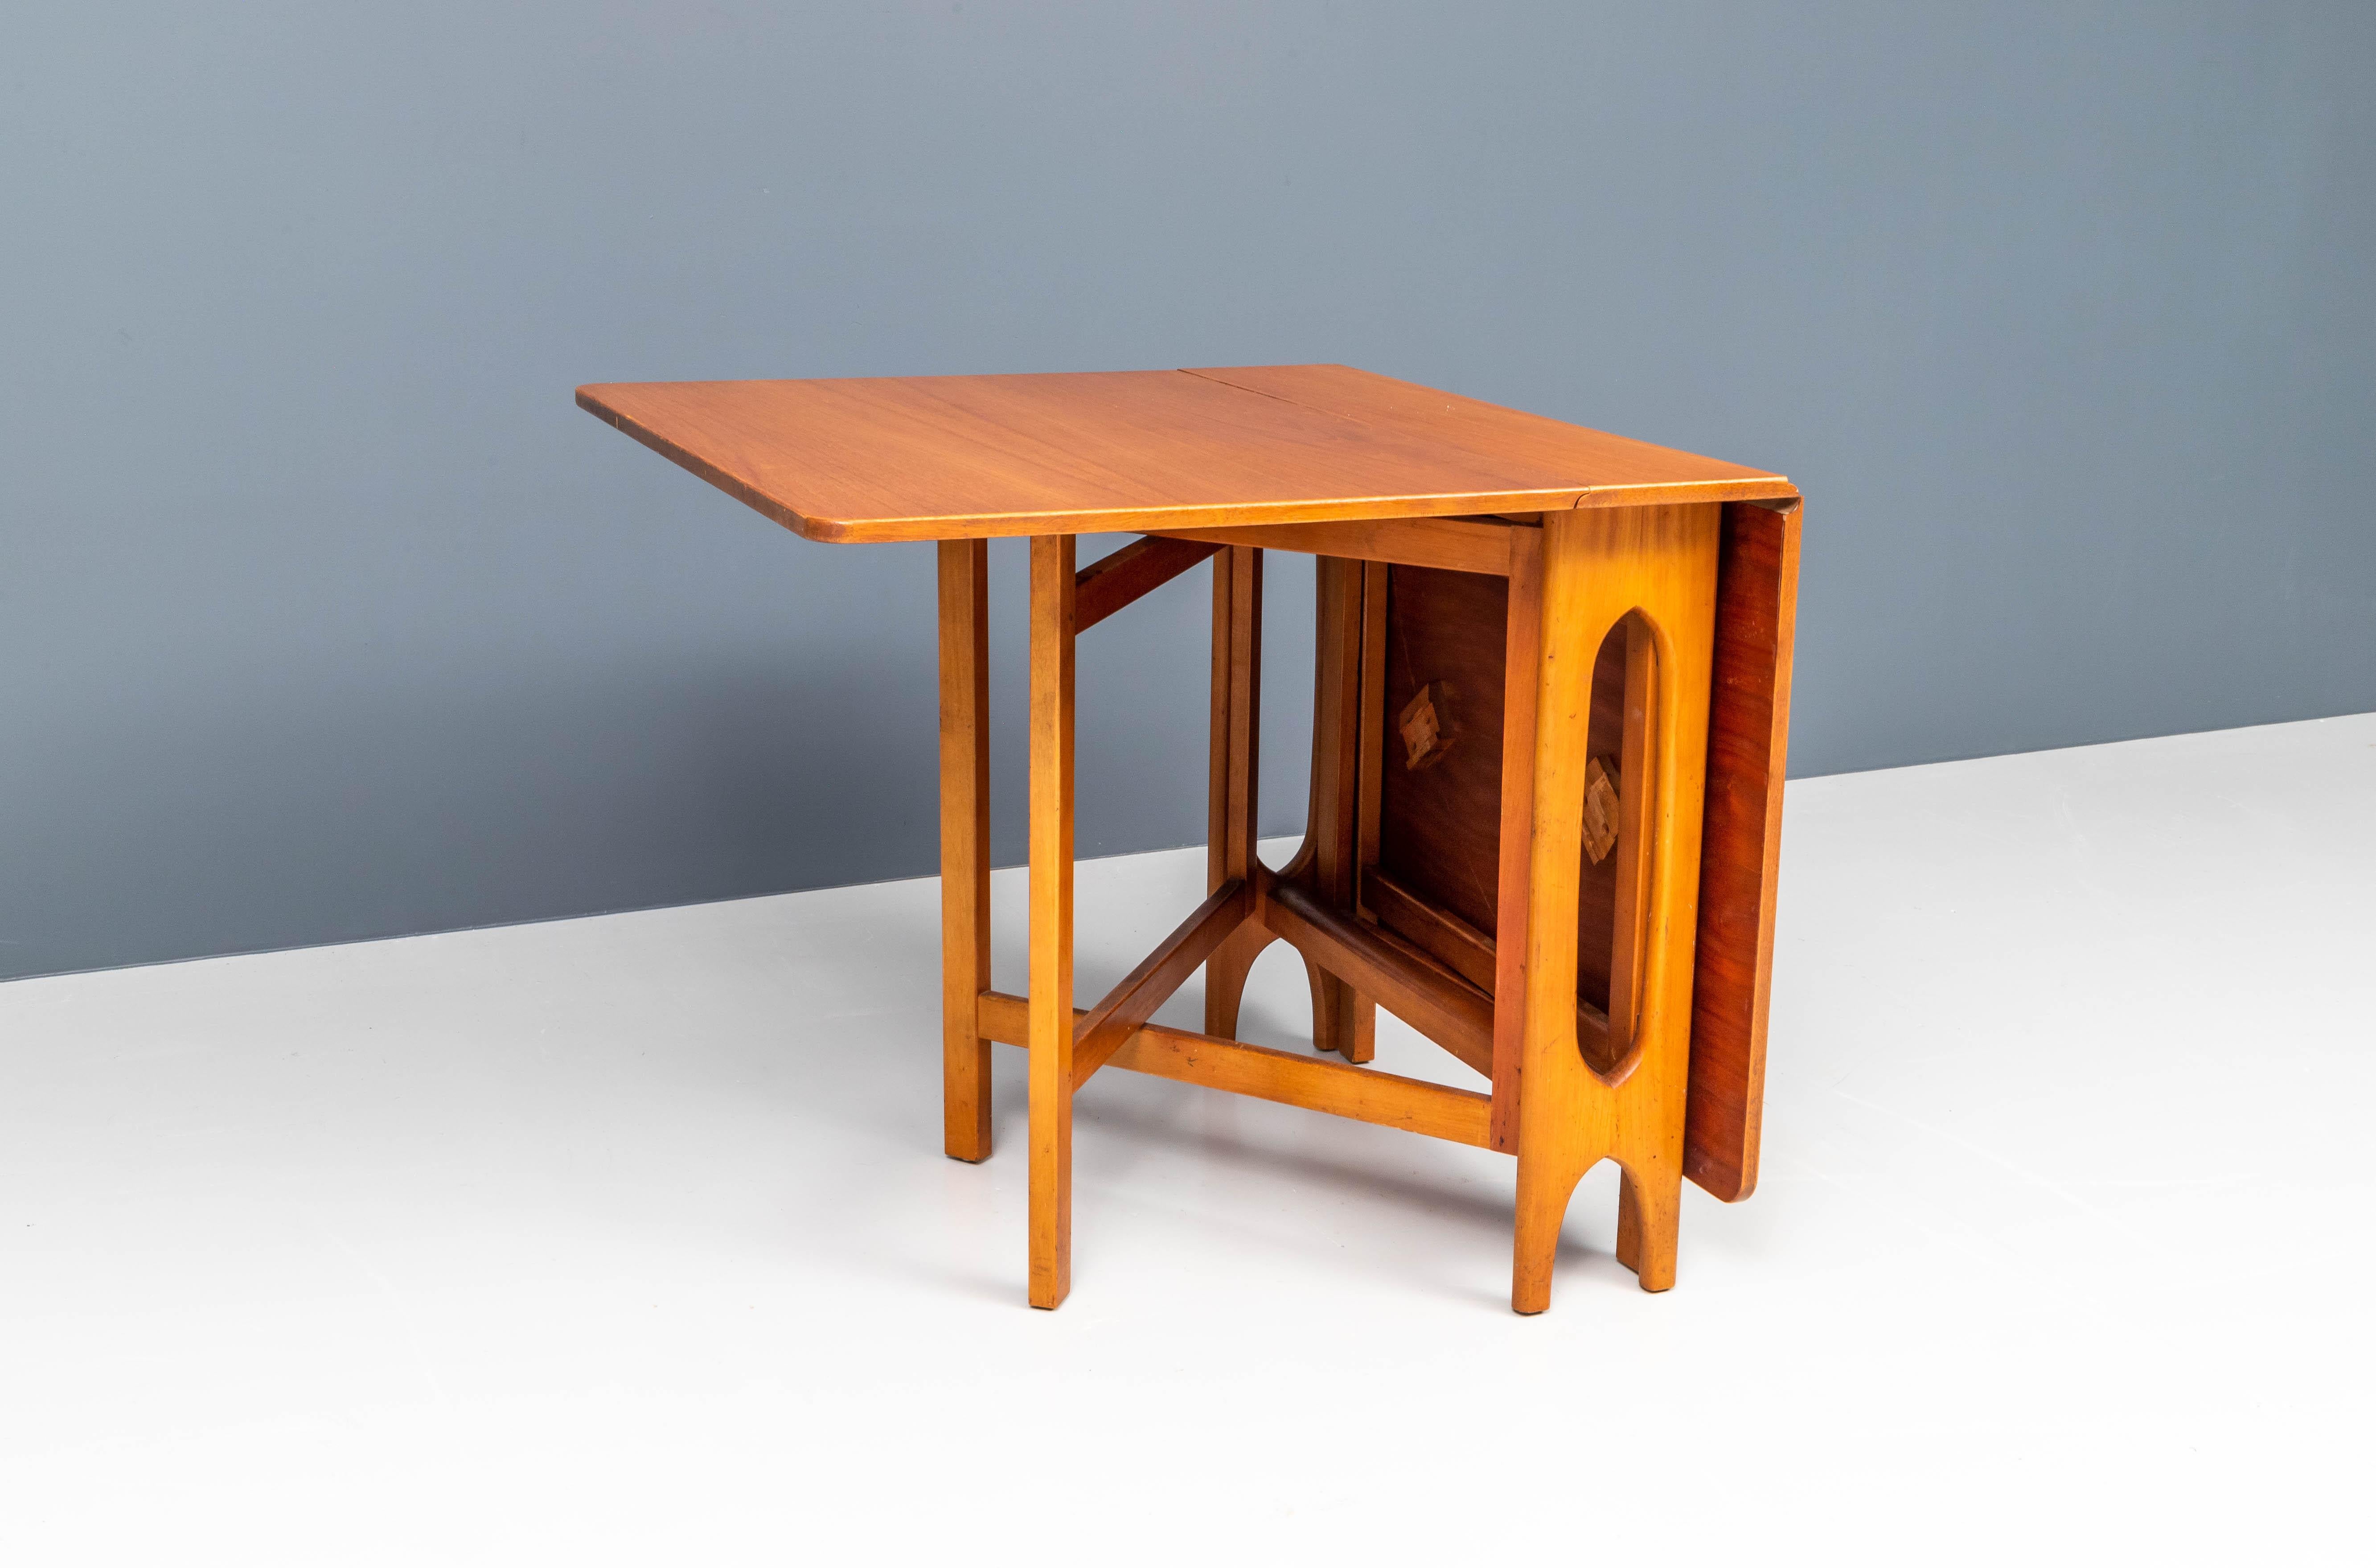 Danish Sculptural Dining Table with Two Drop Leaves in Teak, Denmark, 1960's For Sale